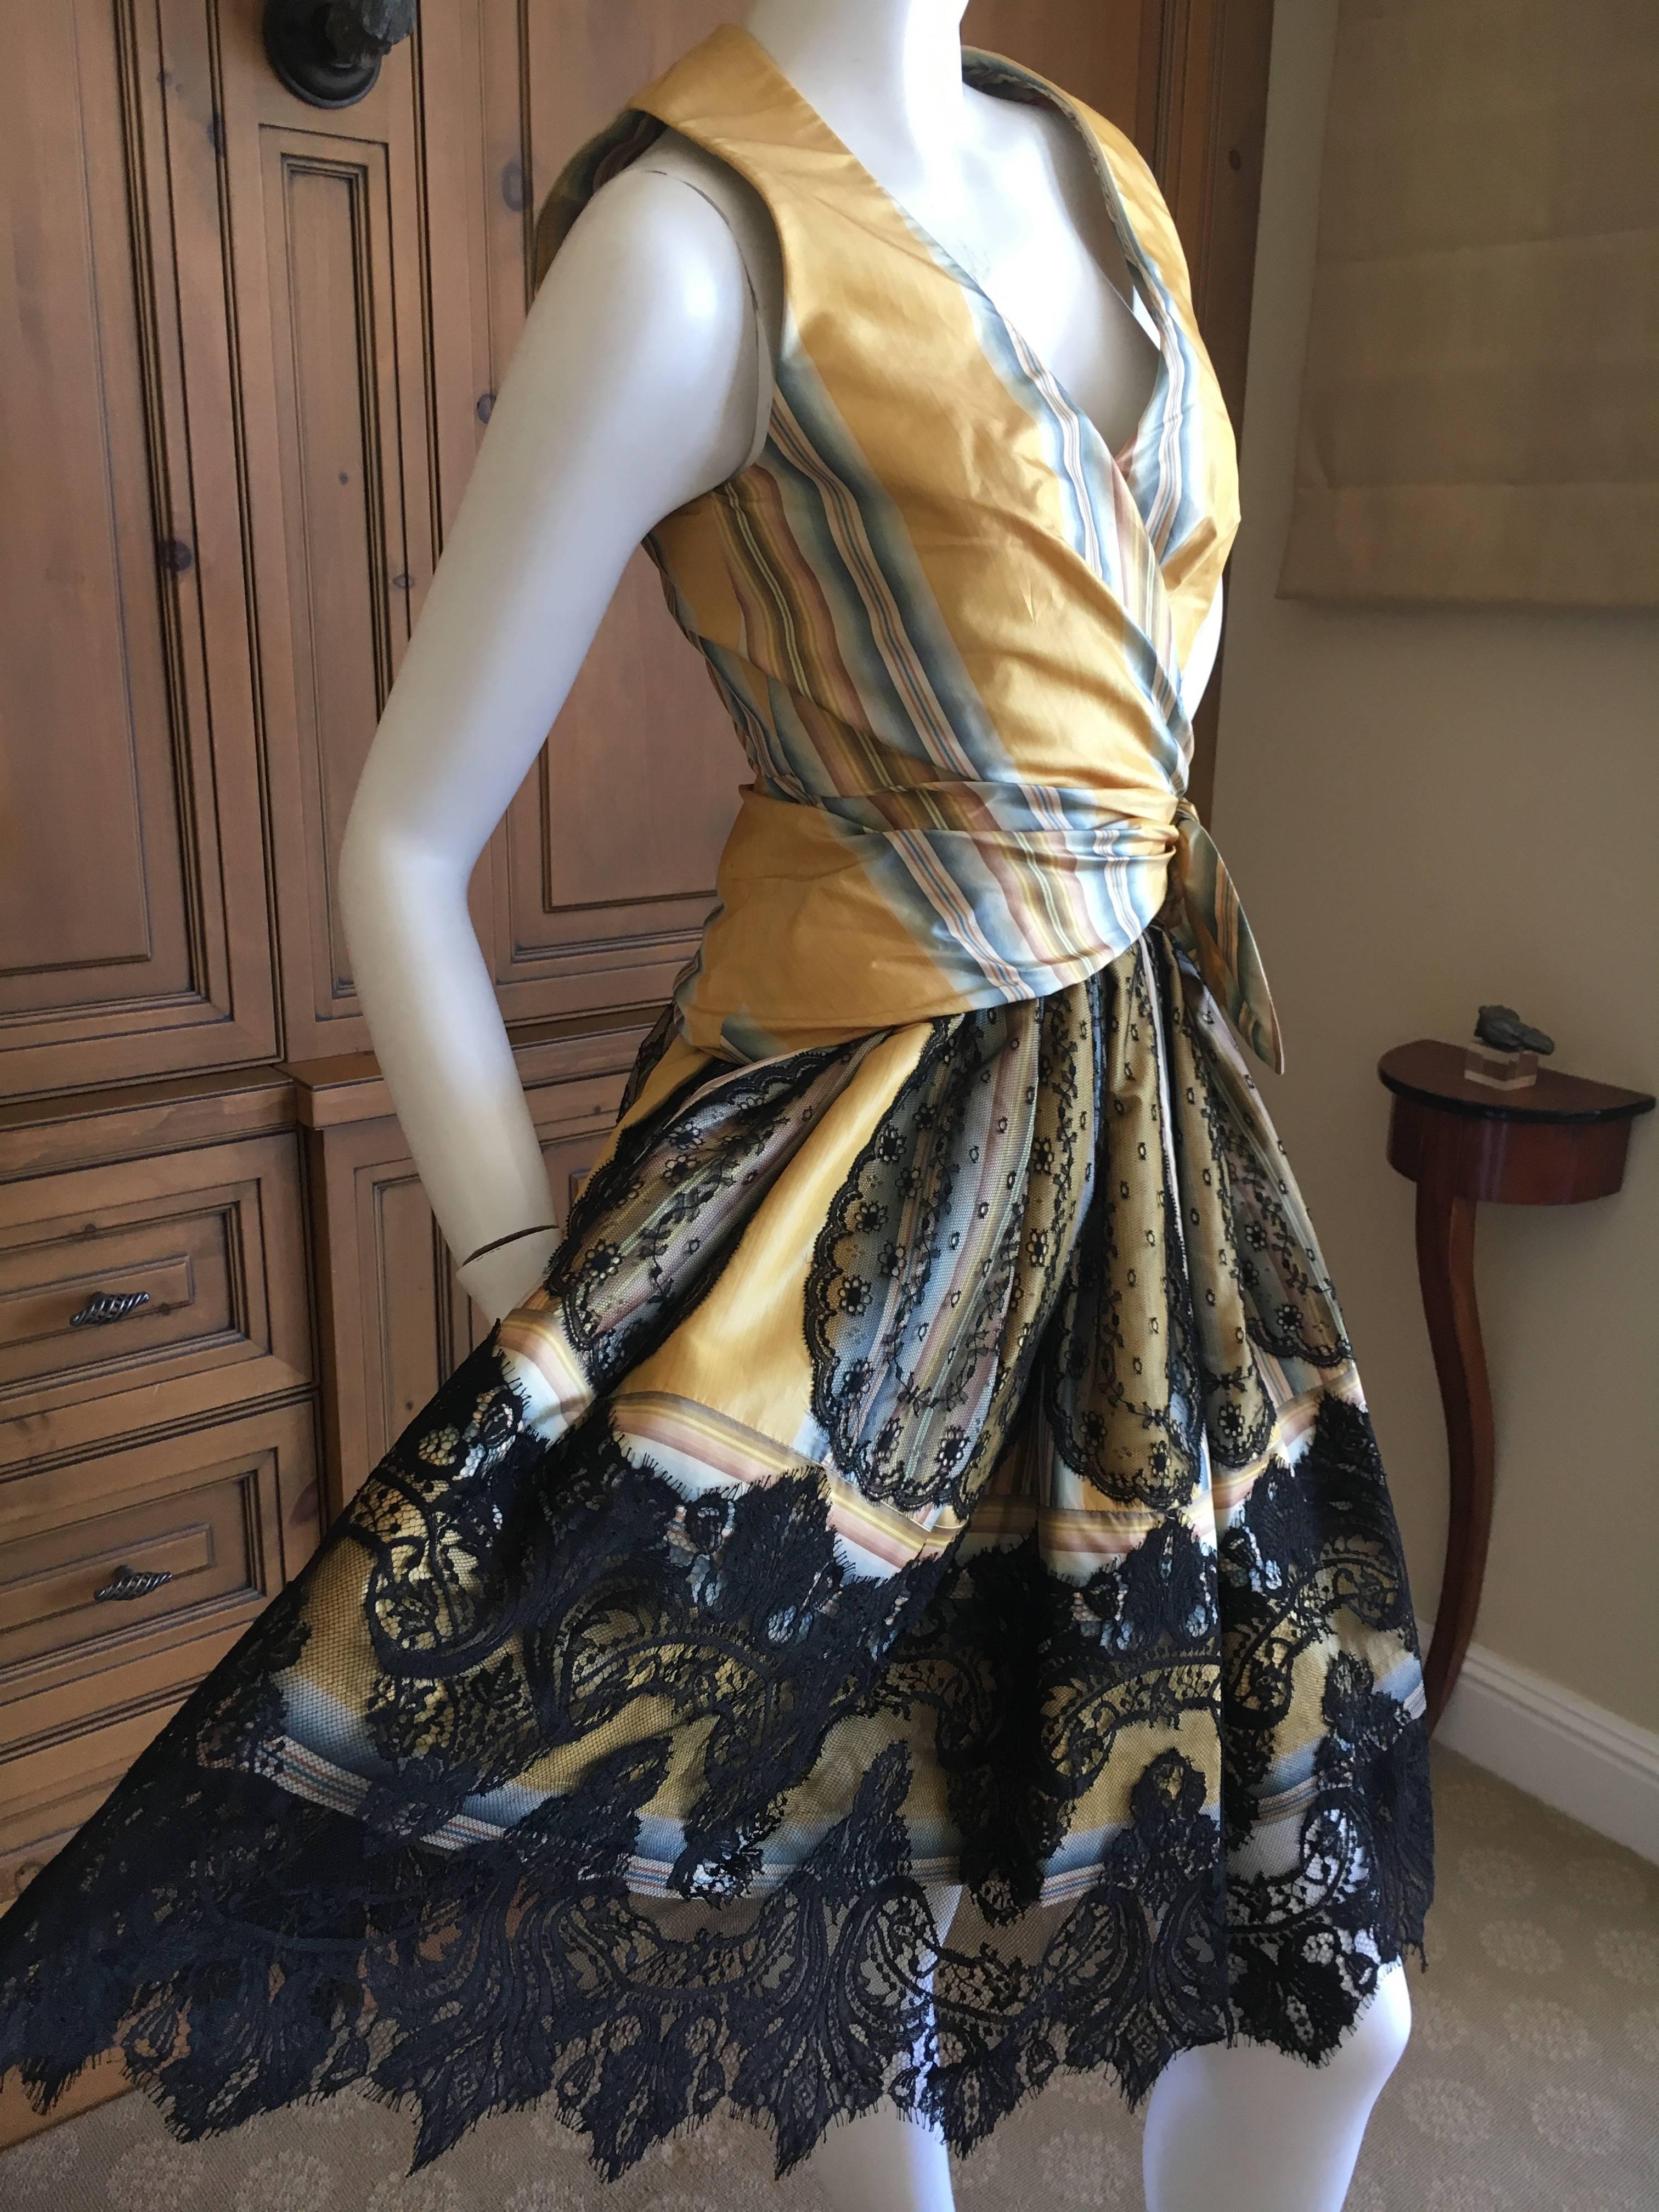 Christian Lacroix Charming Stripe Silk Summer Dress w Arlesian Lace Trim Skirt In Excellent Condition For Sale In Cloverdale, CA